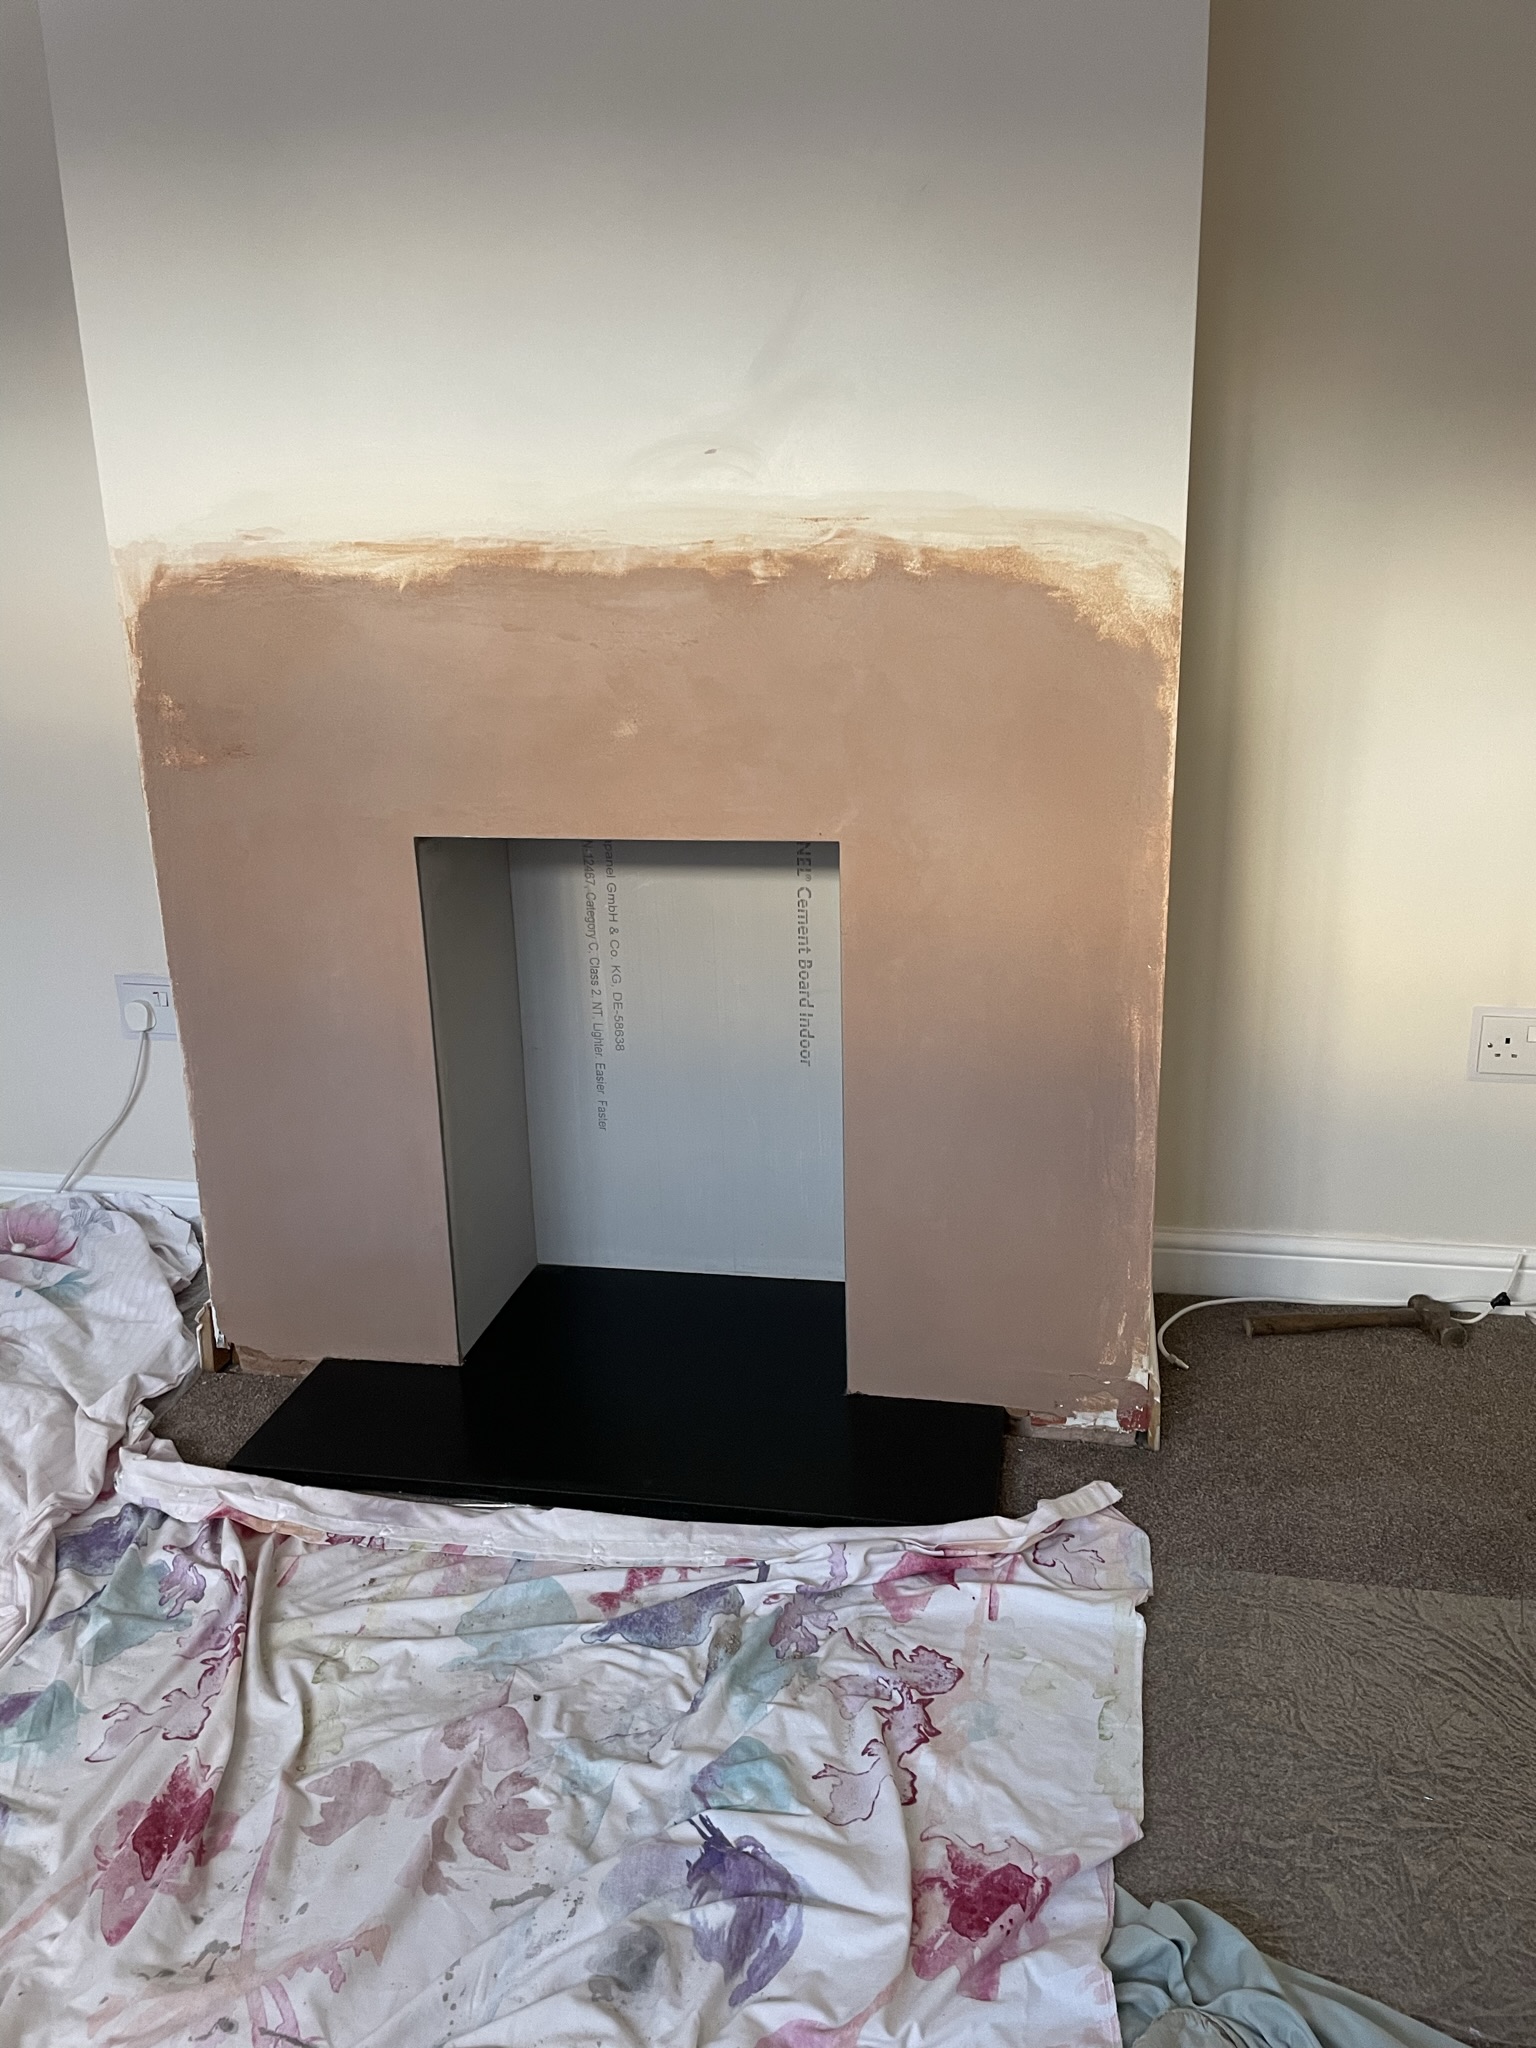 Plastering inside a fire place